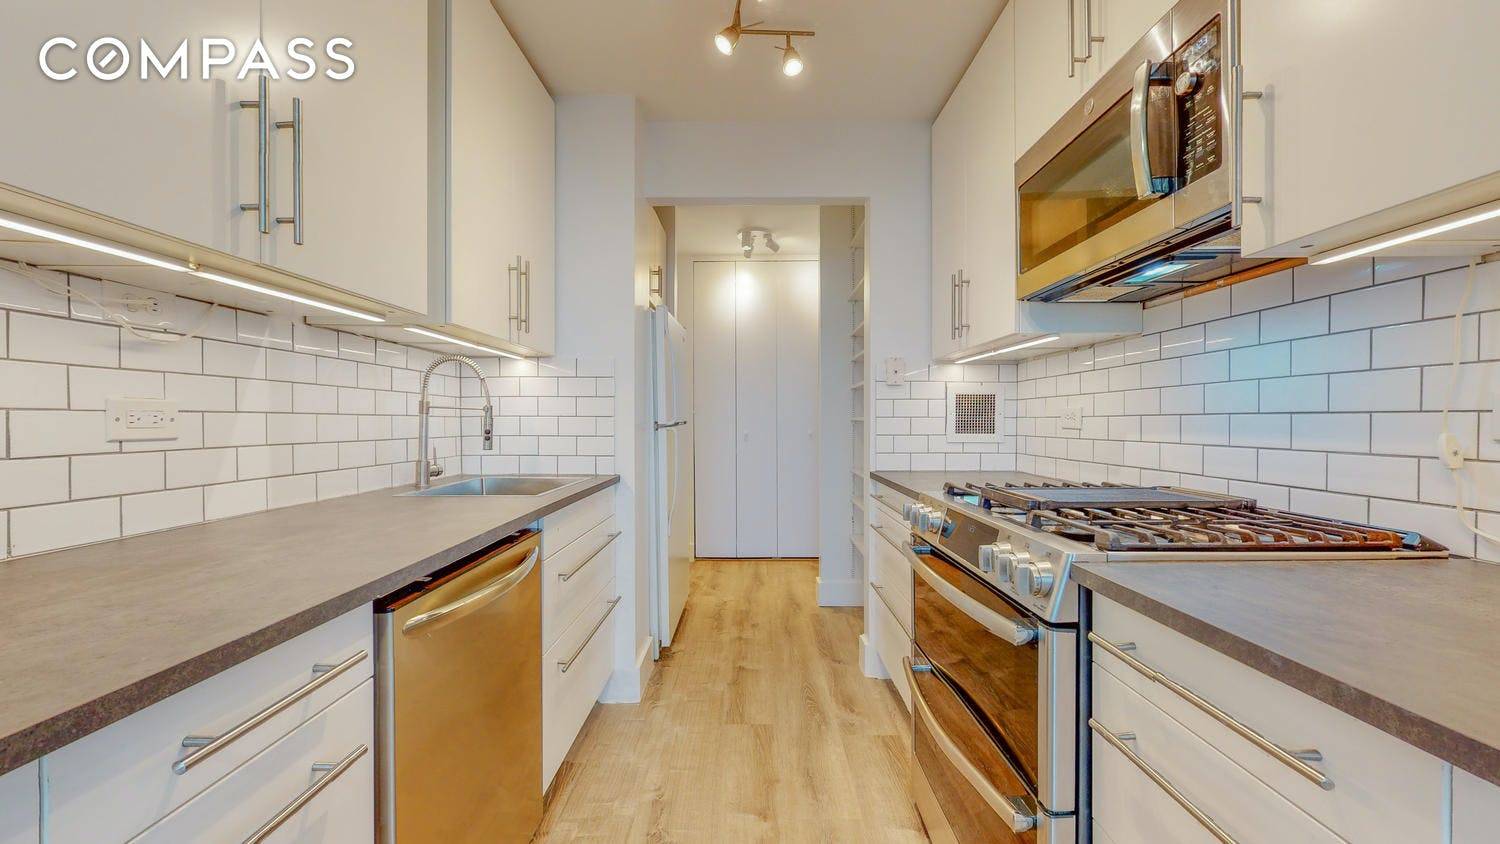 Overlooking Forest Hills gardens and spectacular Manhattan views, this gracious 1, 158 sq ft south facing two bedroom with master en suite bath, offers sunshine all day and magical sunsets ...